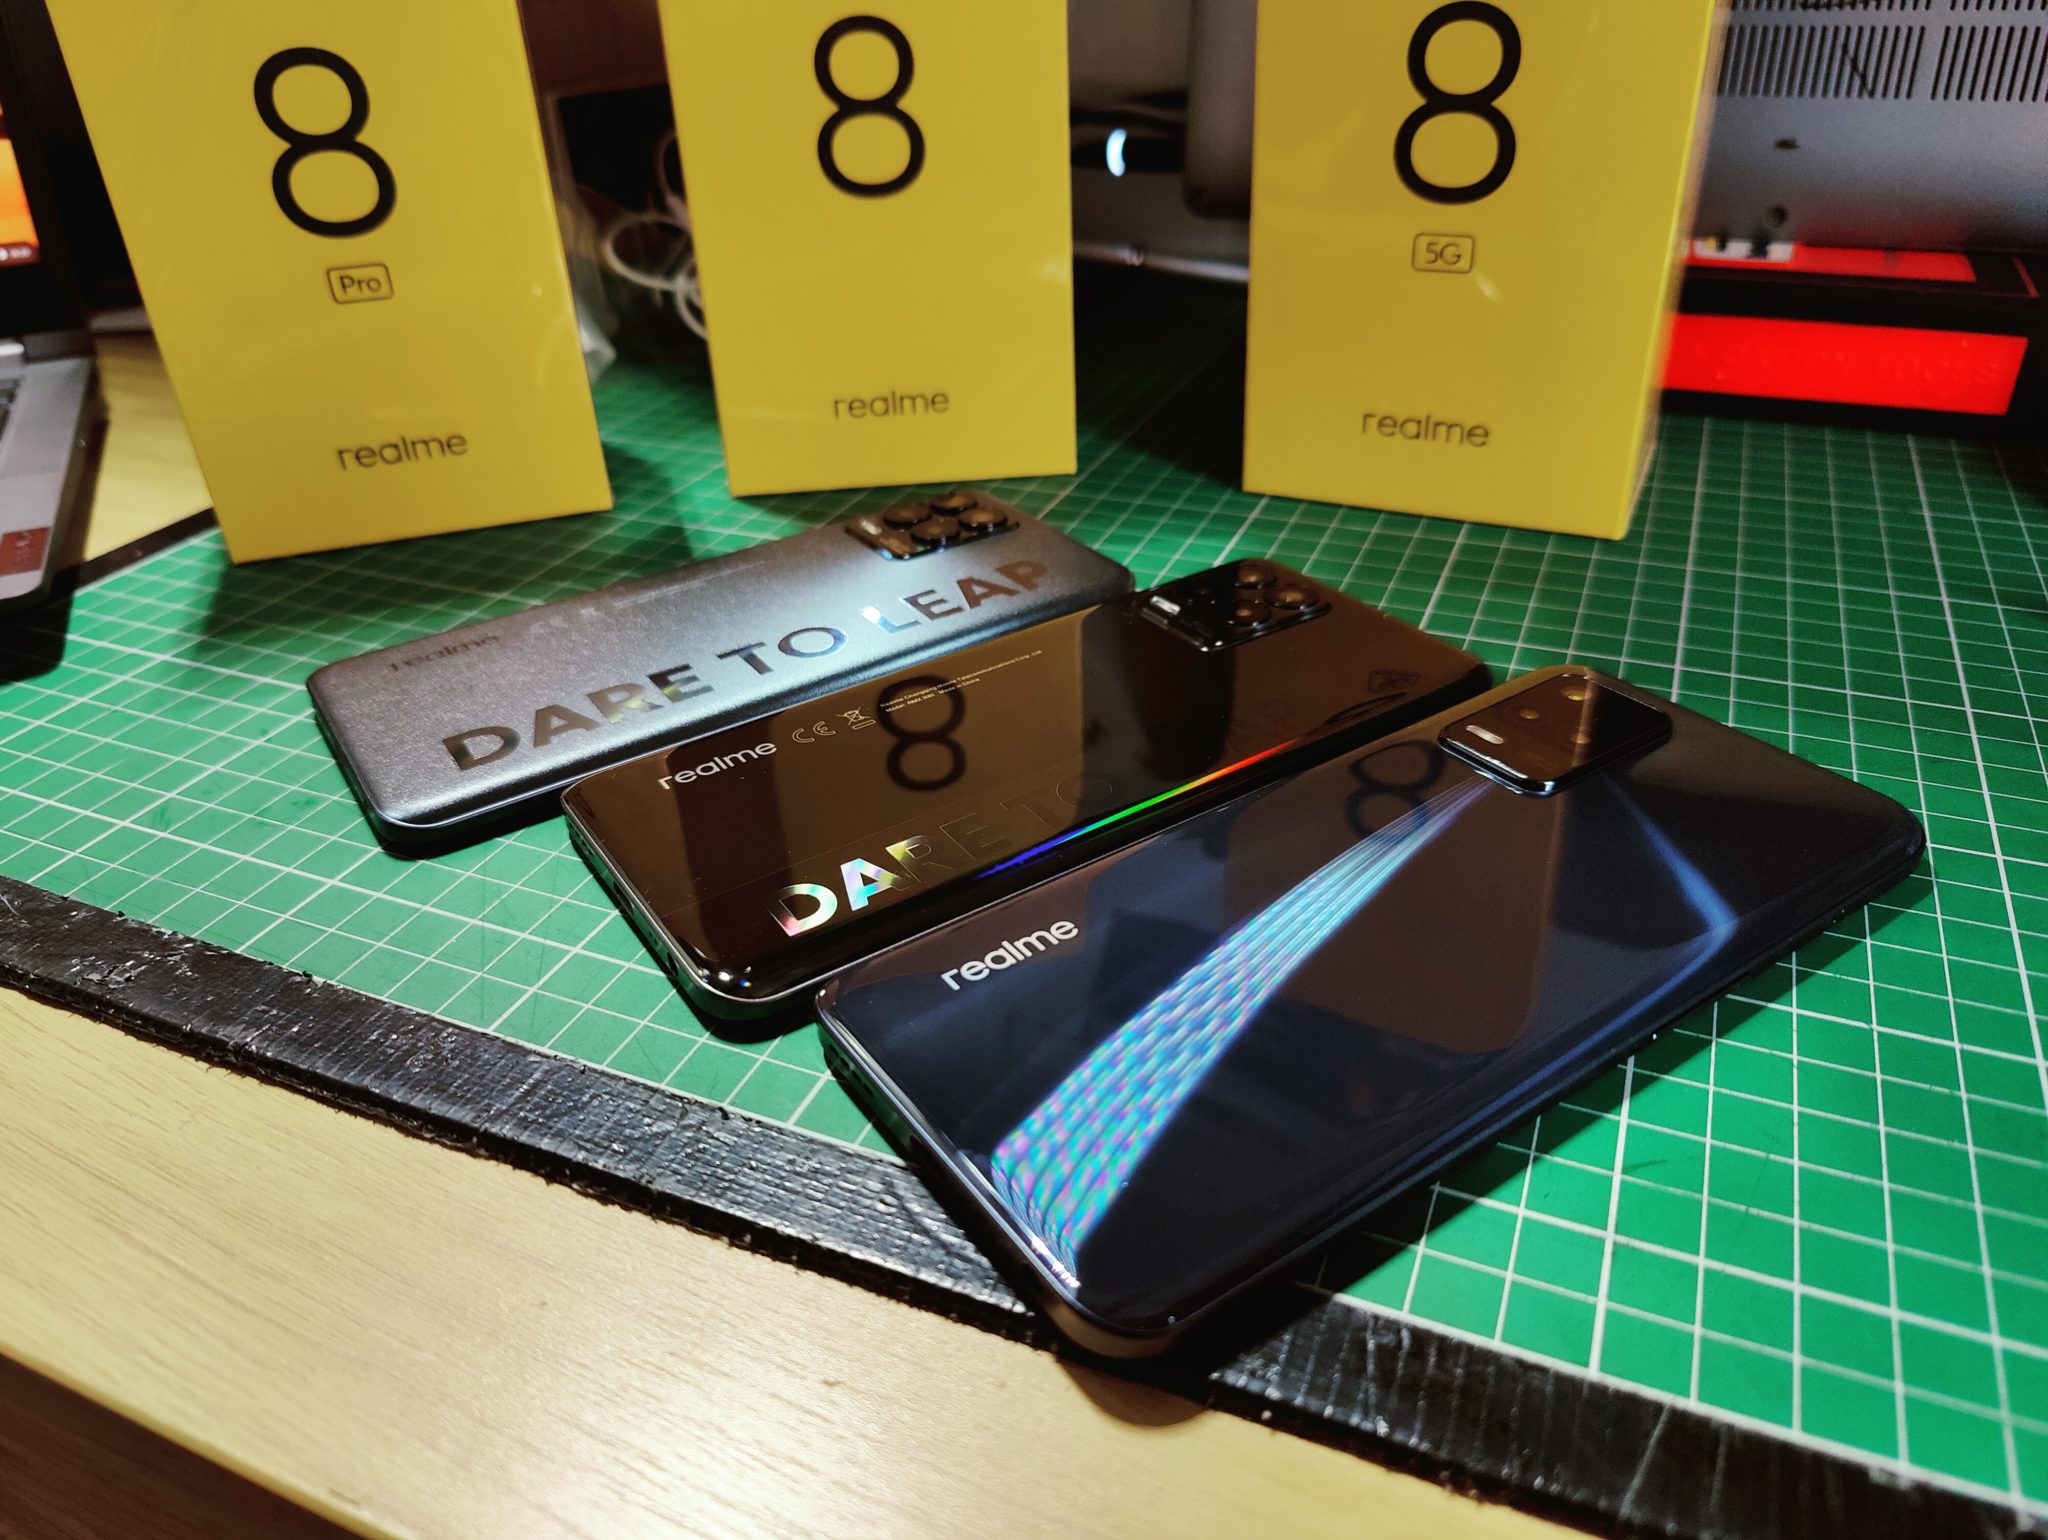 We have the Realme 8 family let’s unbox them